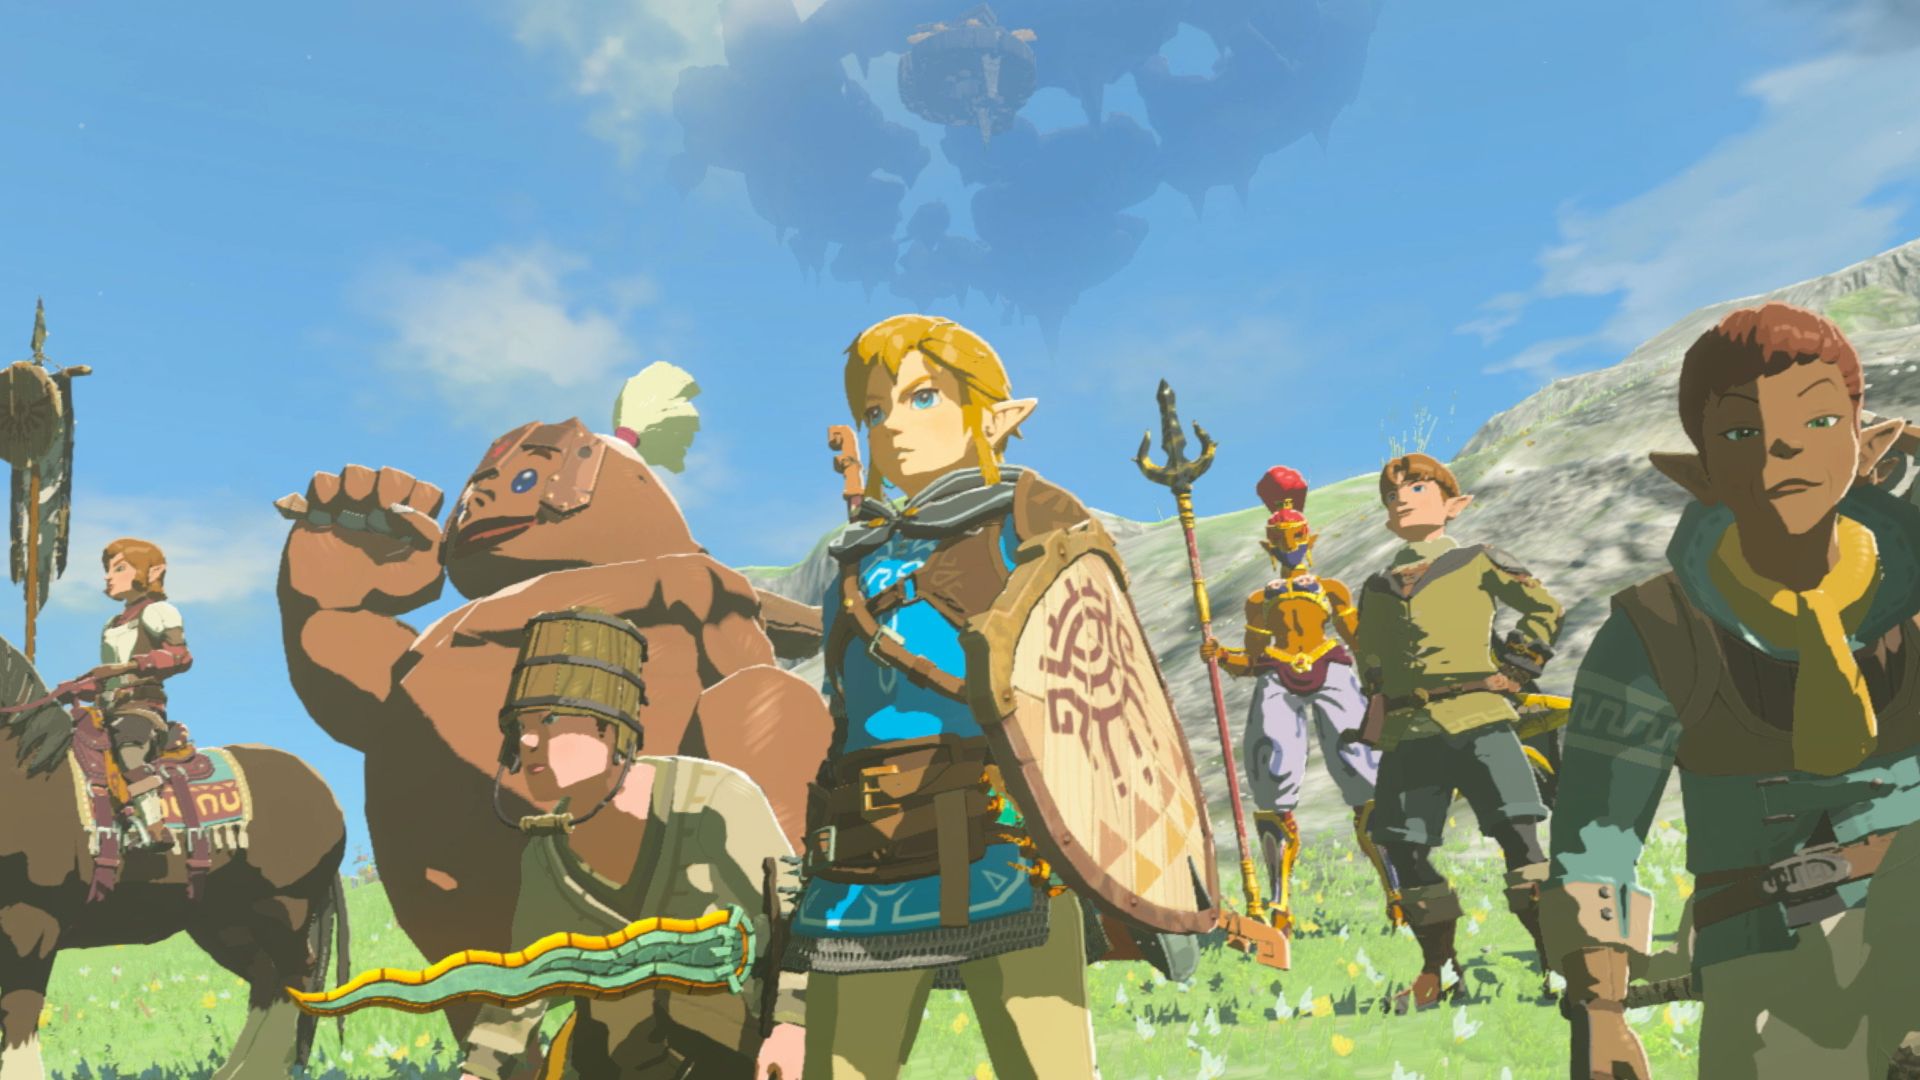 Zelda: Tears of the Kingdom review - Link, a blonde boy holding a wooden shield and glowing sword wearing a blue tunic, surrounded by friends, one tall woman in ornate armour, just a standard looking sort of medieval farmer-type, a large rock man, and some others.